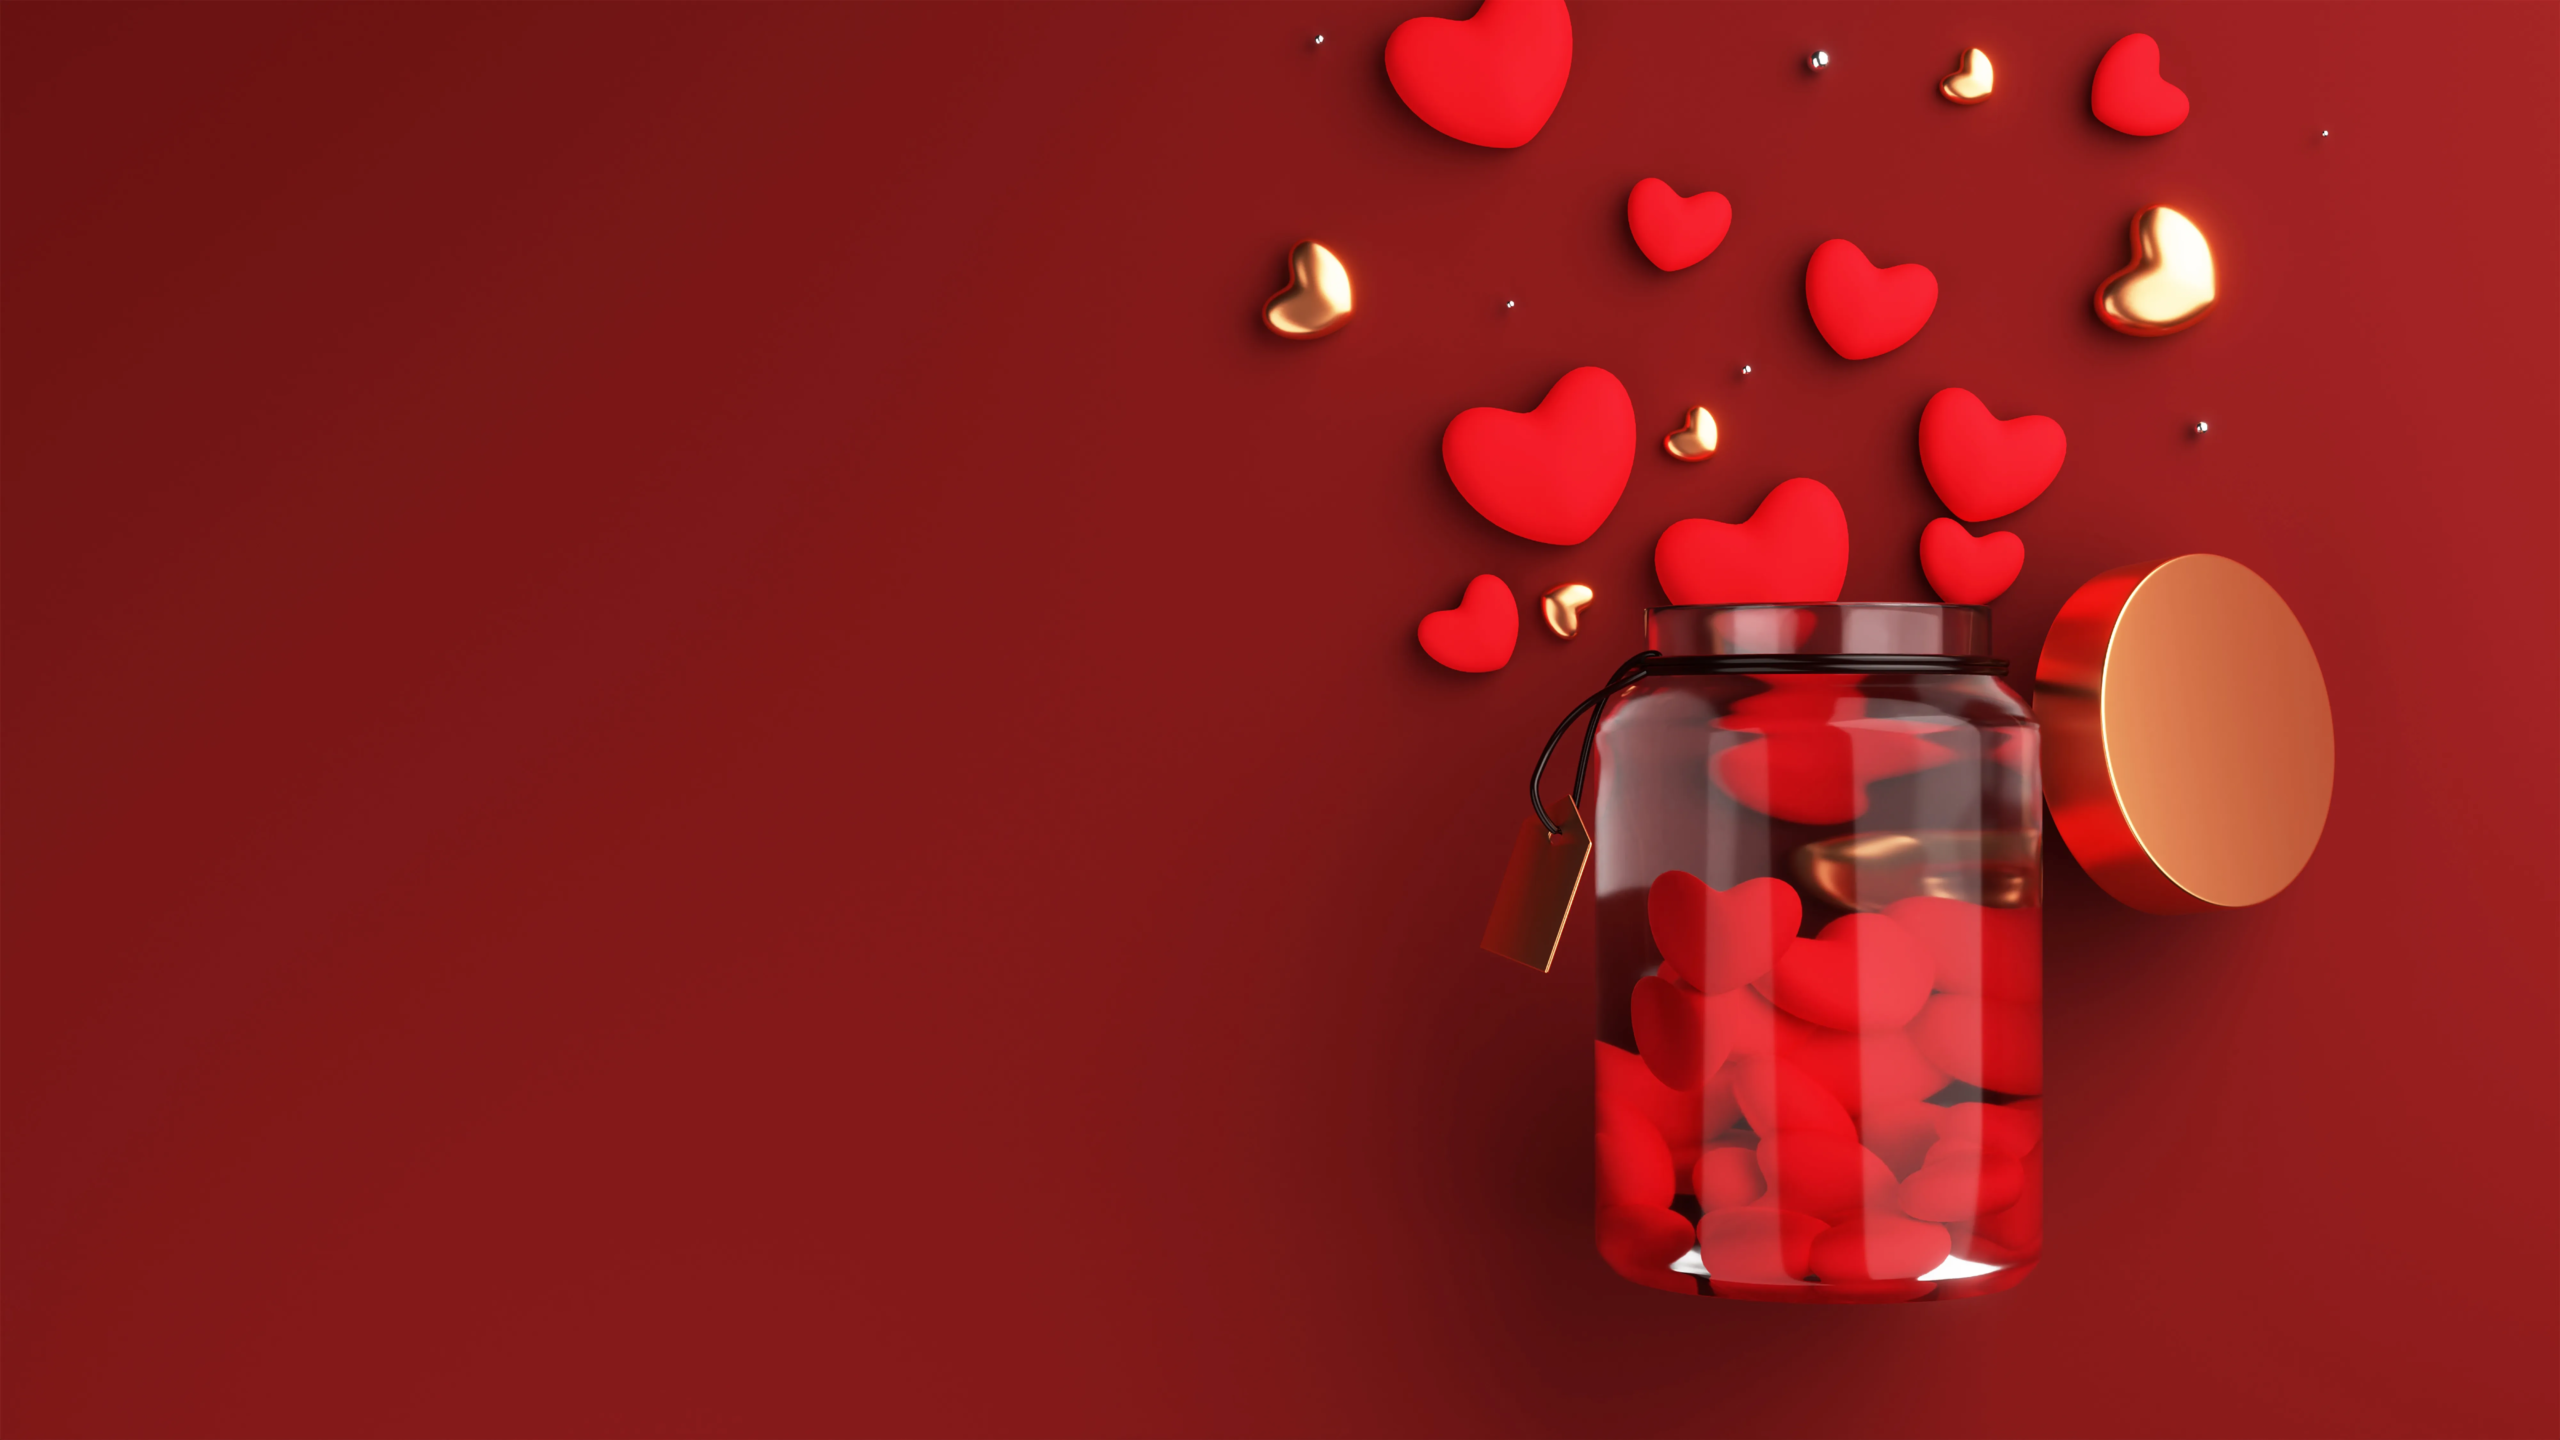 Download Free 3D valentines day Image